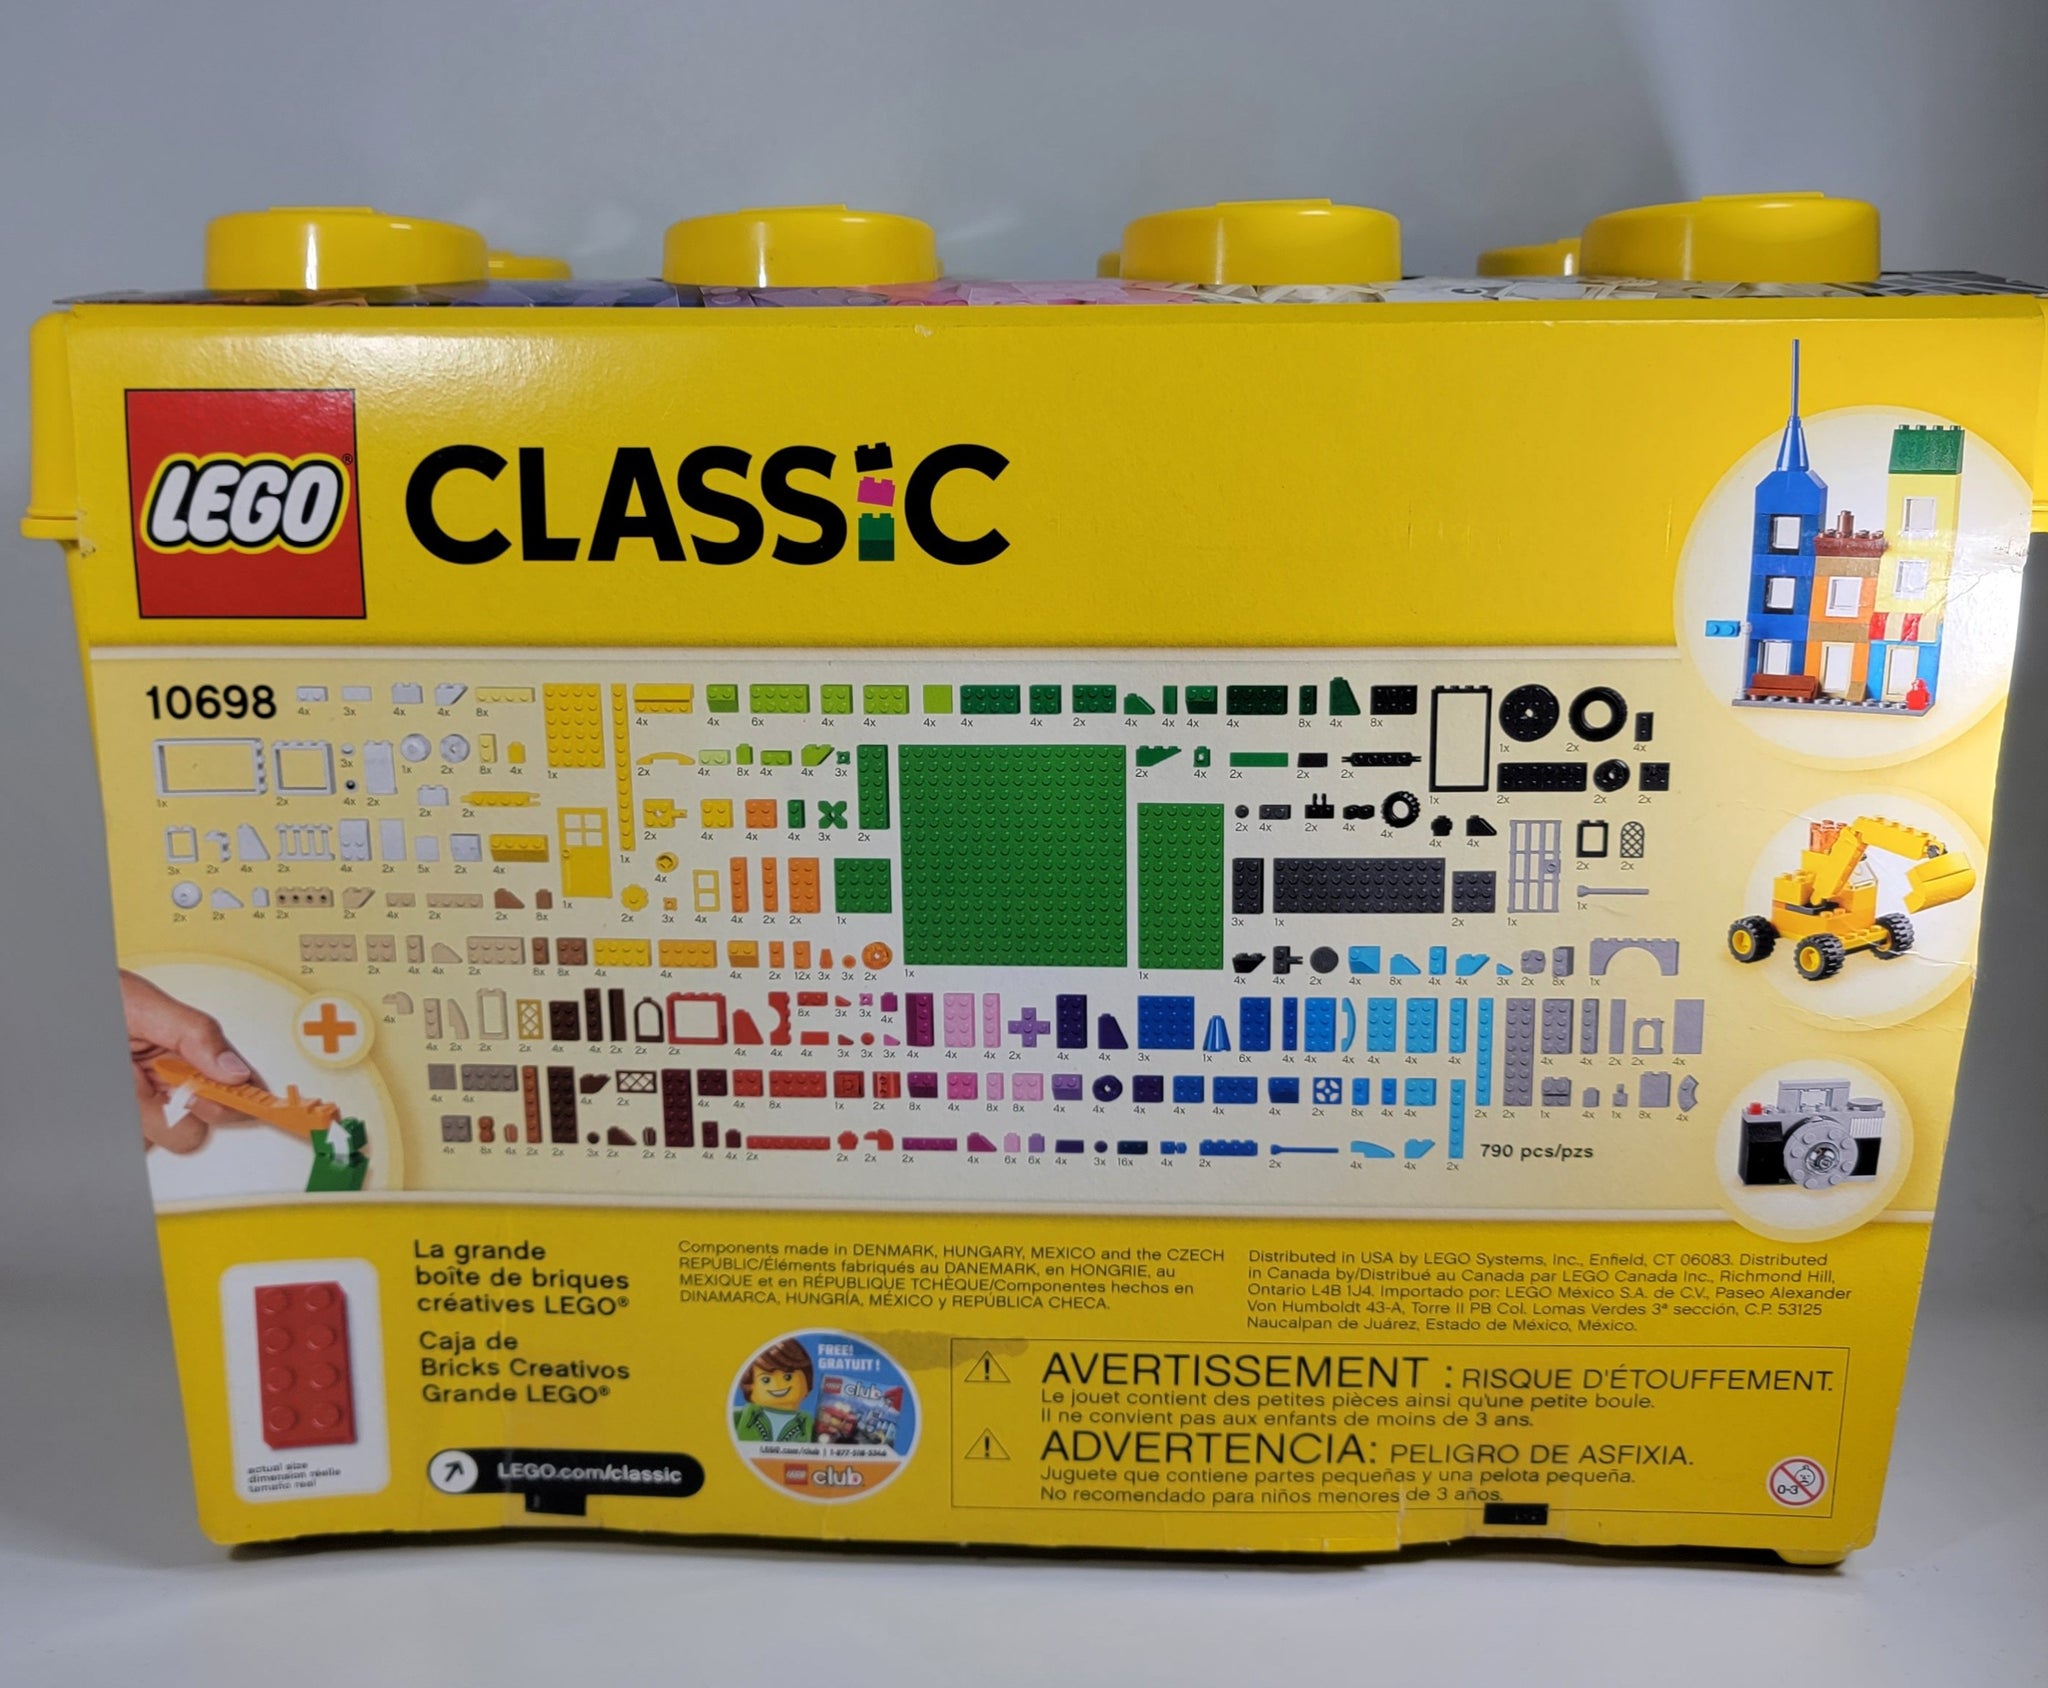 A box of old Lego — Our Vintage Lego Collection